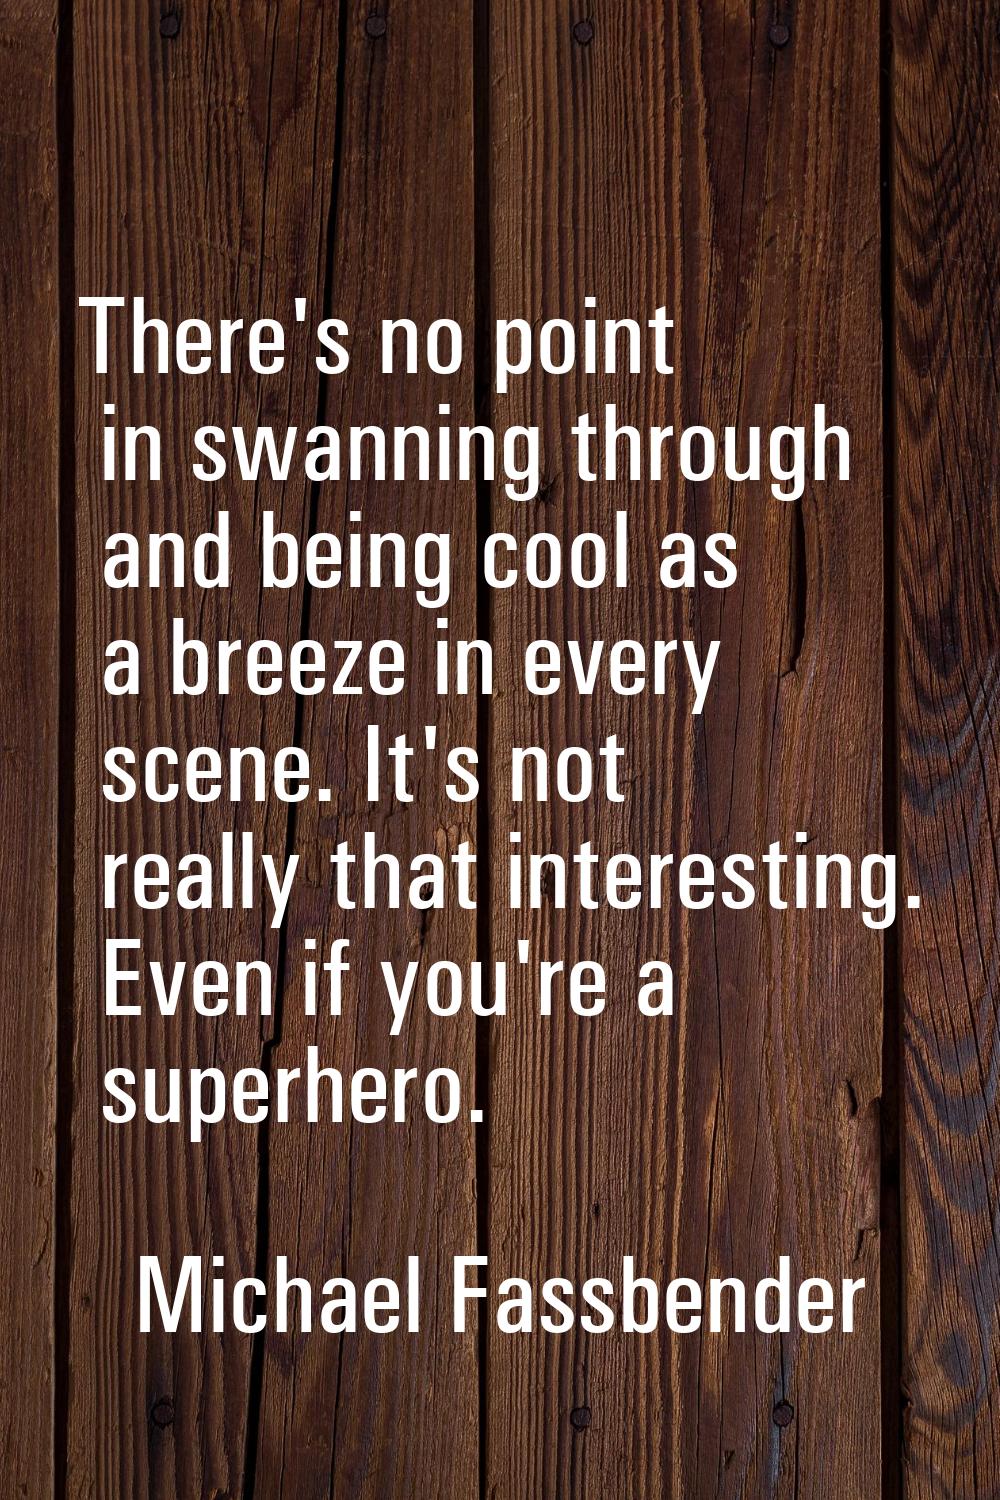 There's no point in swanning through and being cool as a breeze in every scene. It's not really tha